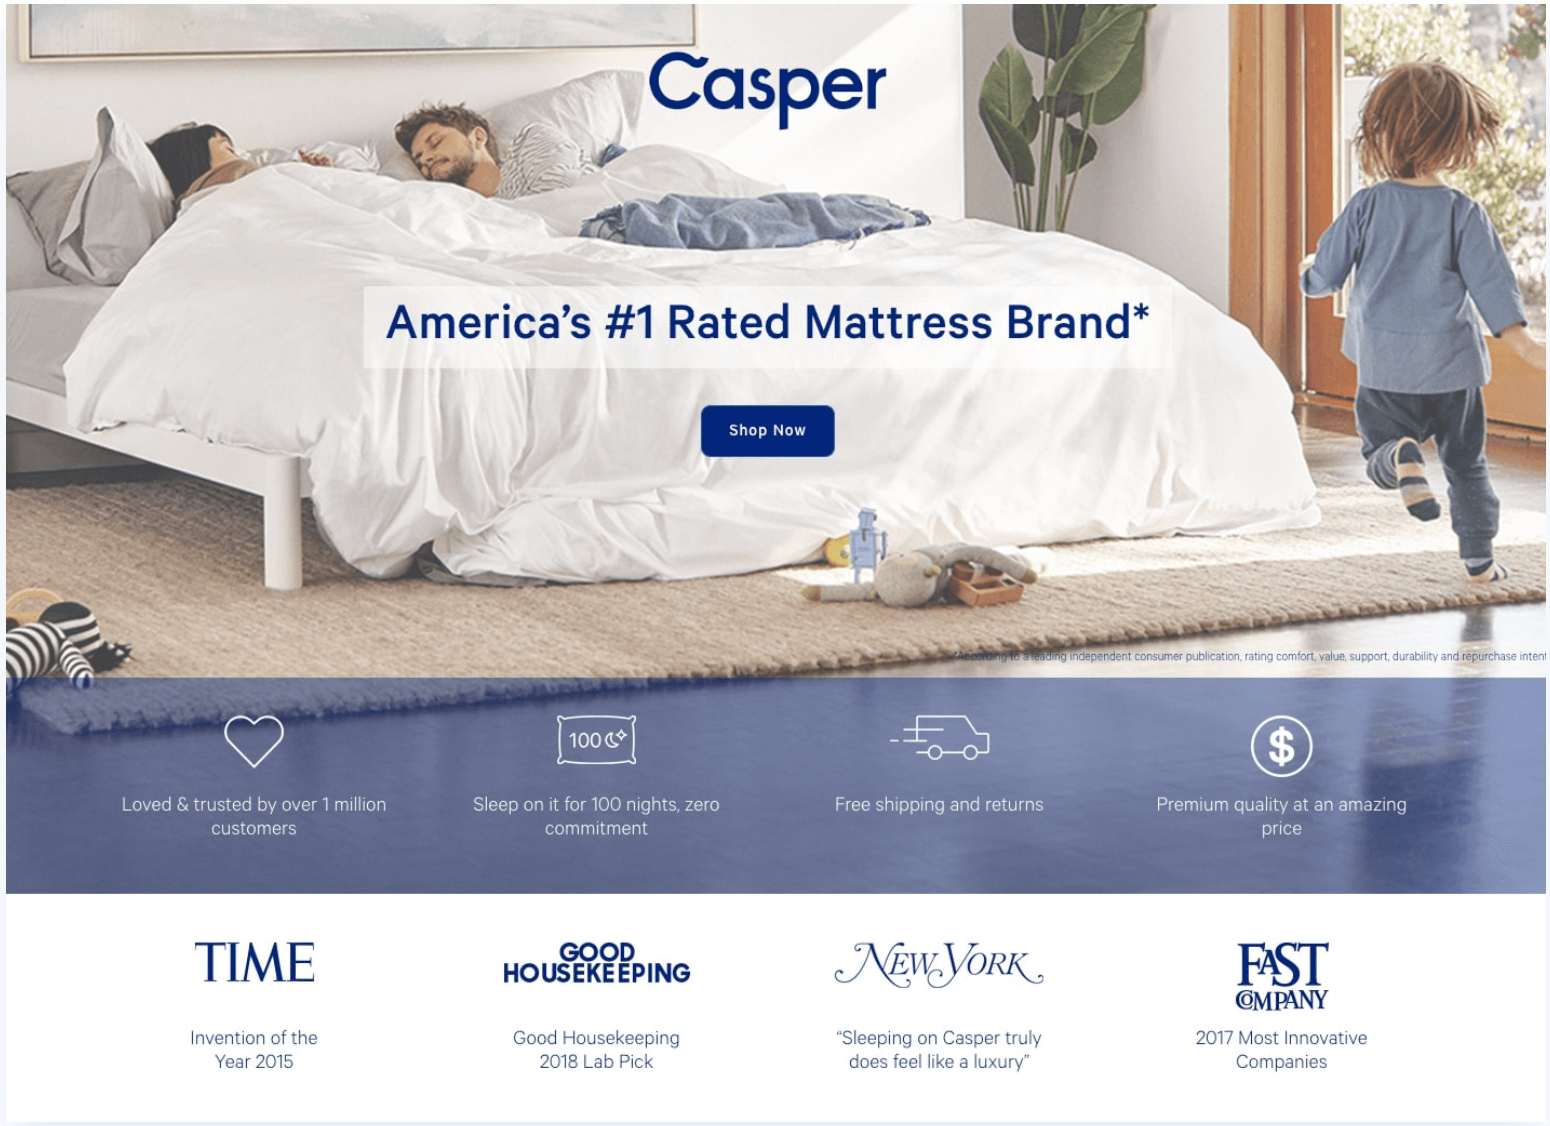 A landing page from Casper encouraging visitors to shop now